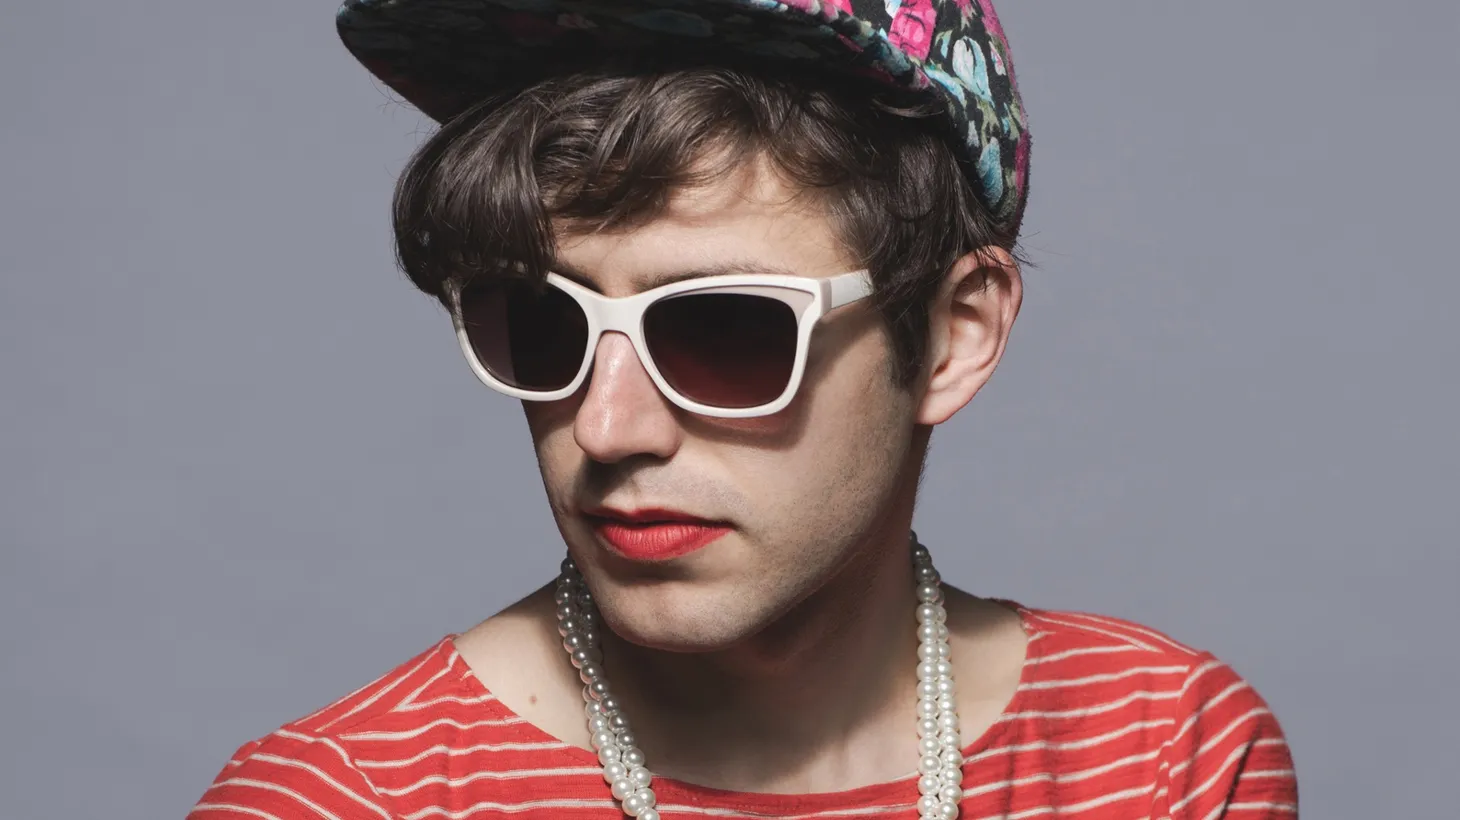 The Guardian UK calls Chicago native Ezra Furman “the most compelling live act you can see right now.”